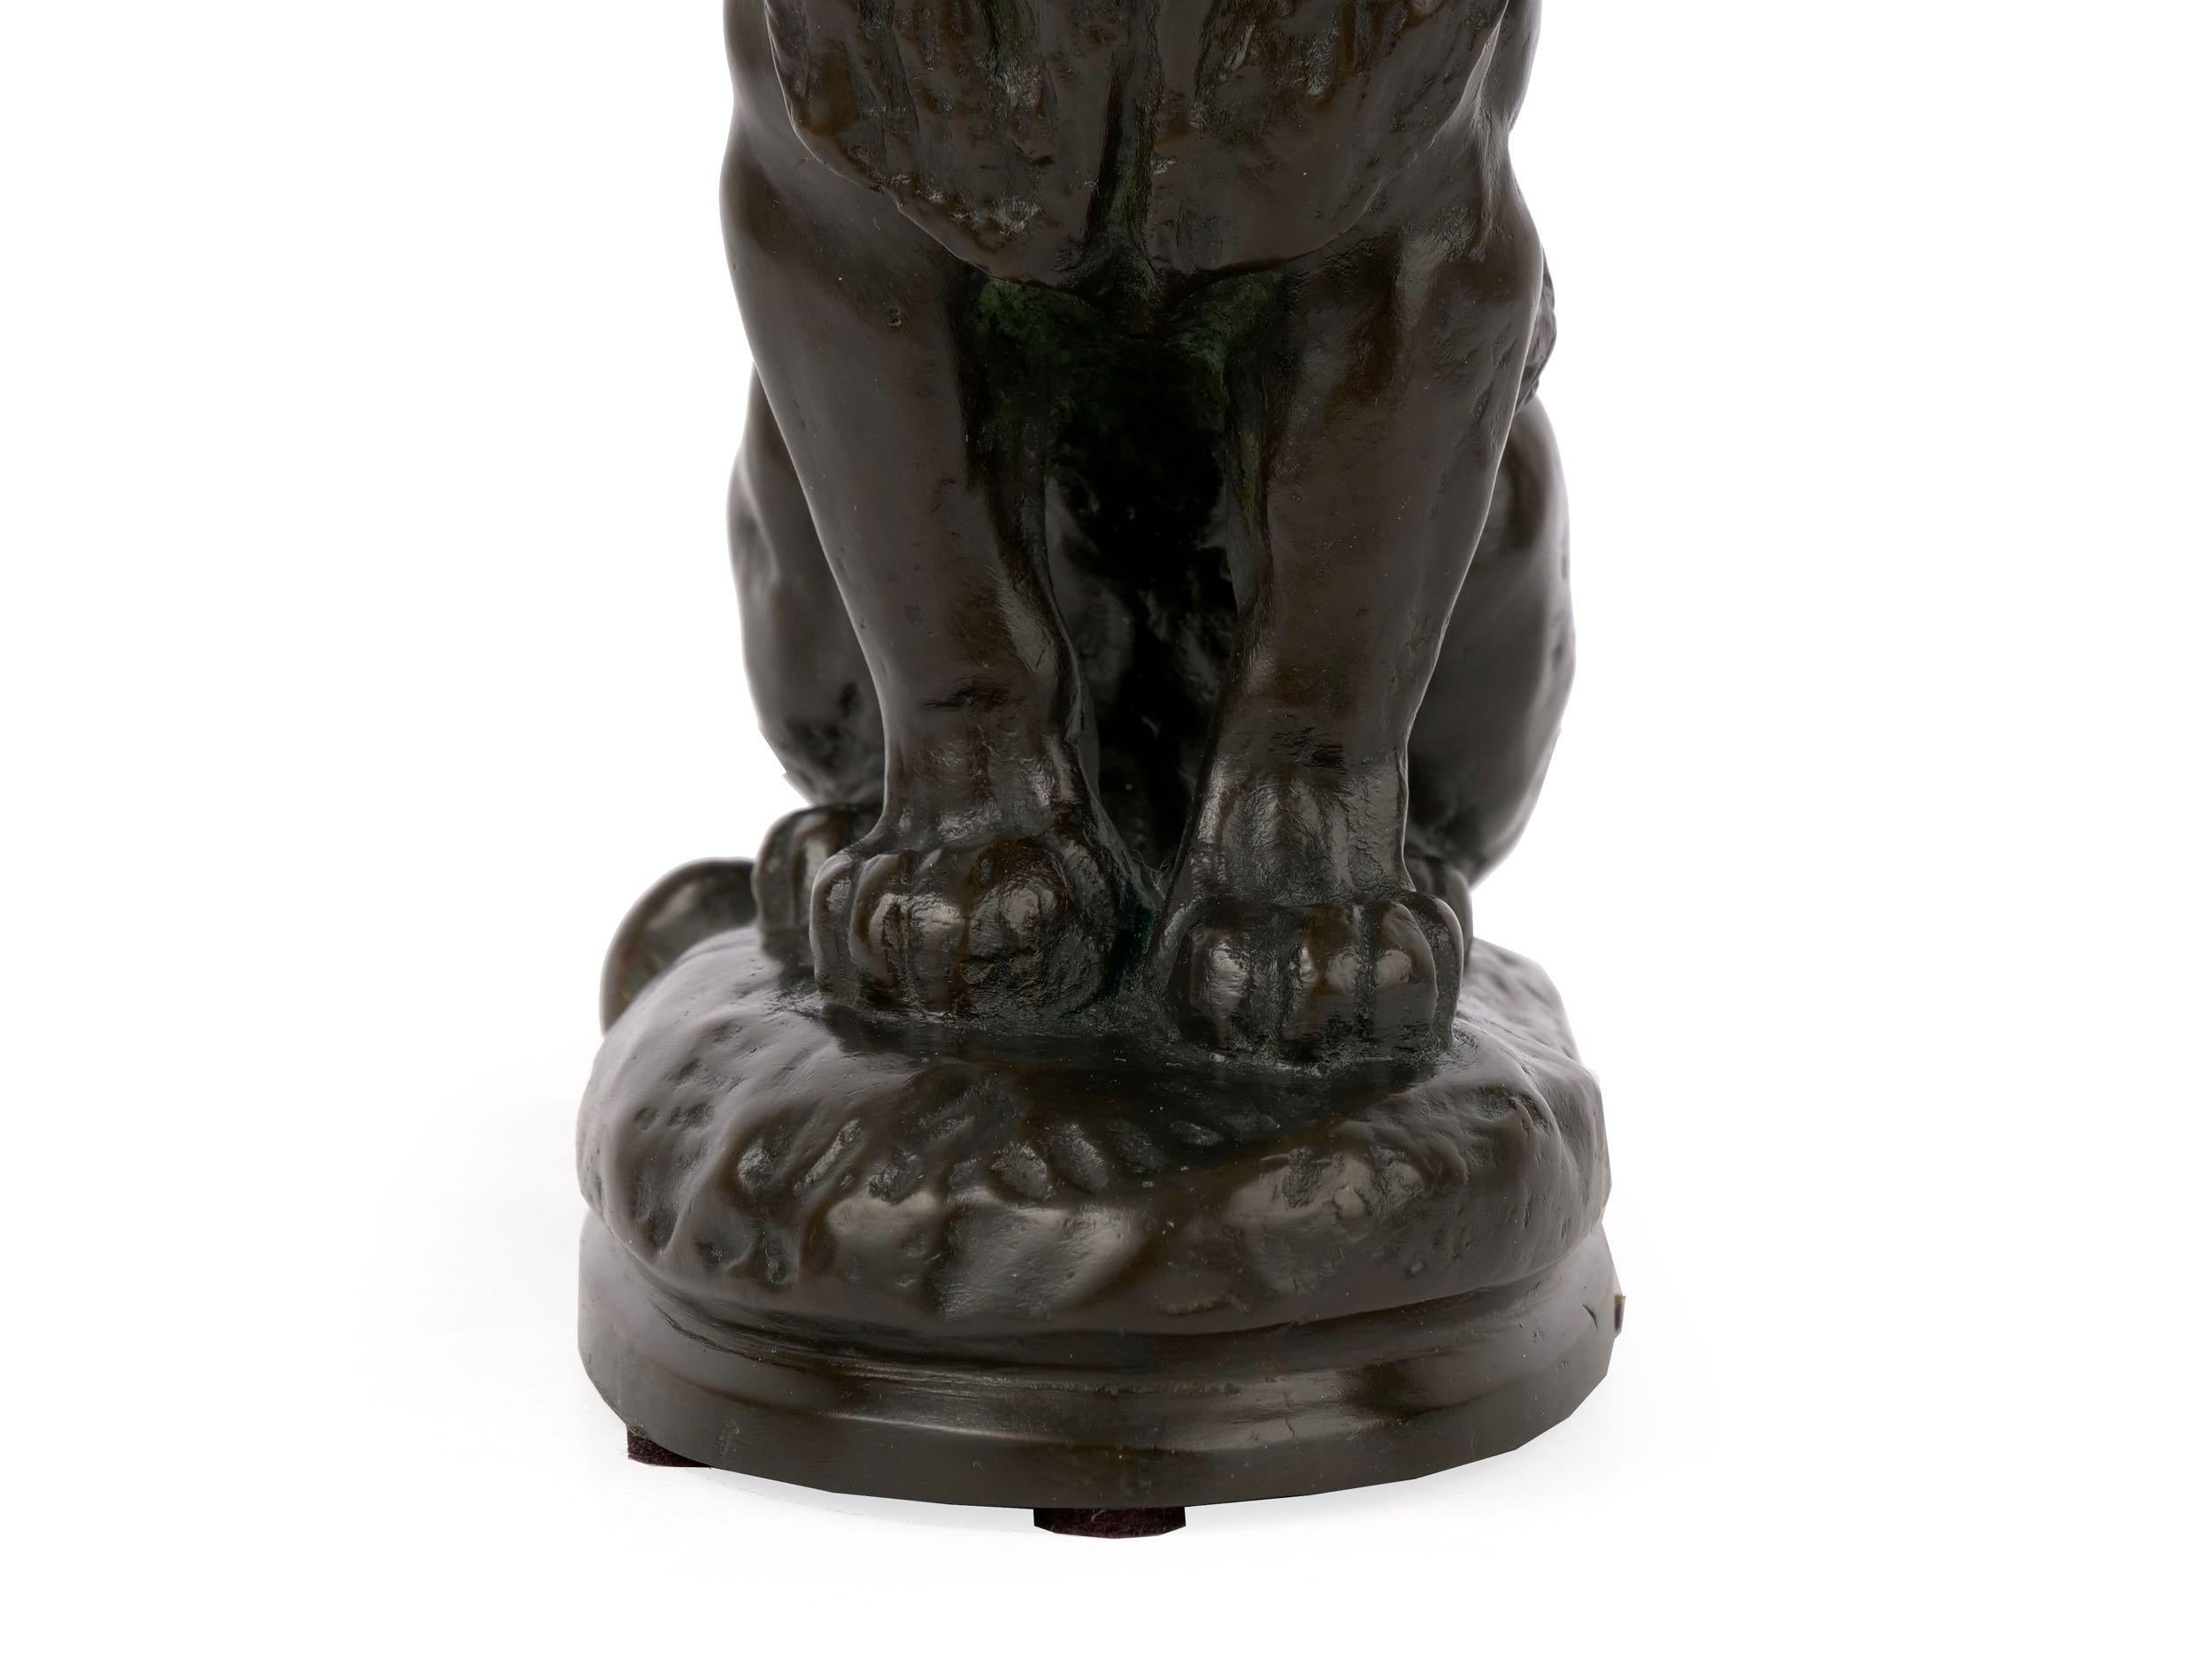 “Seated Lion” Antique French Bronze Sculpture Cast after Antoine-Louis Barye 3